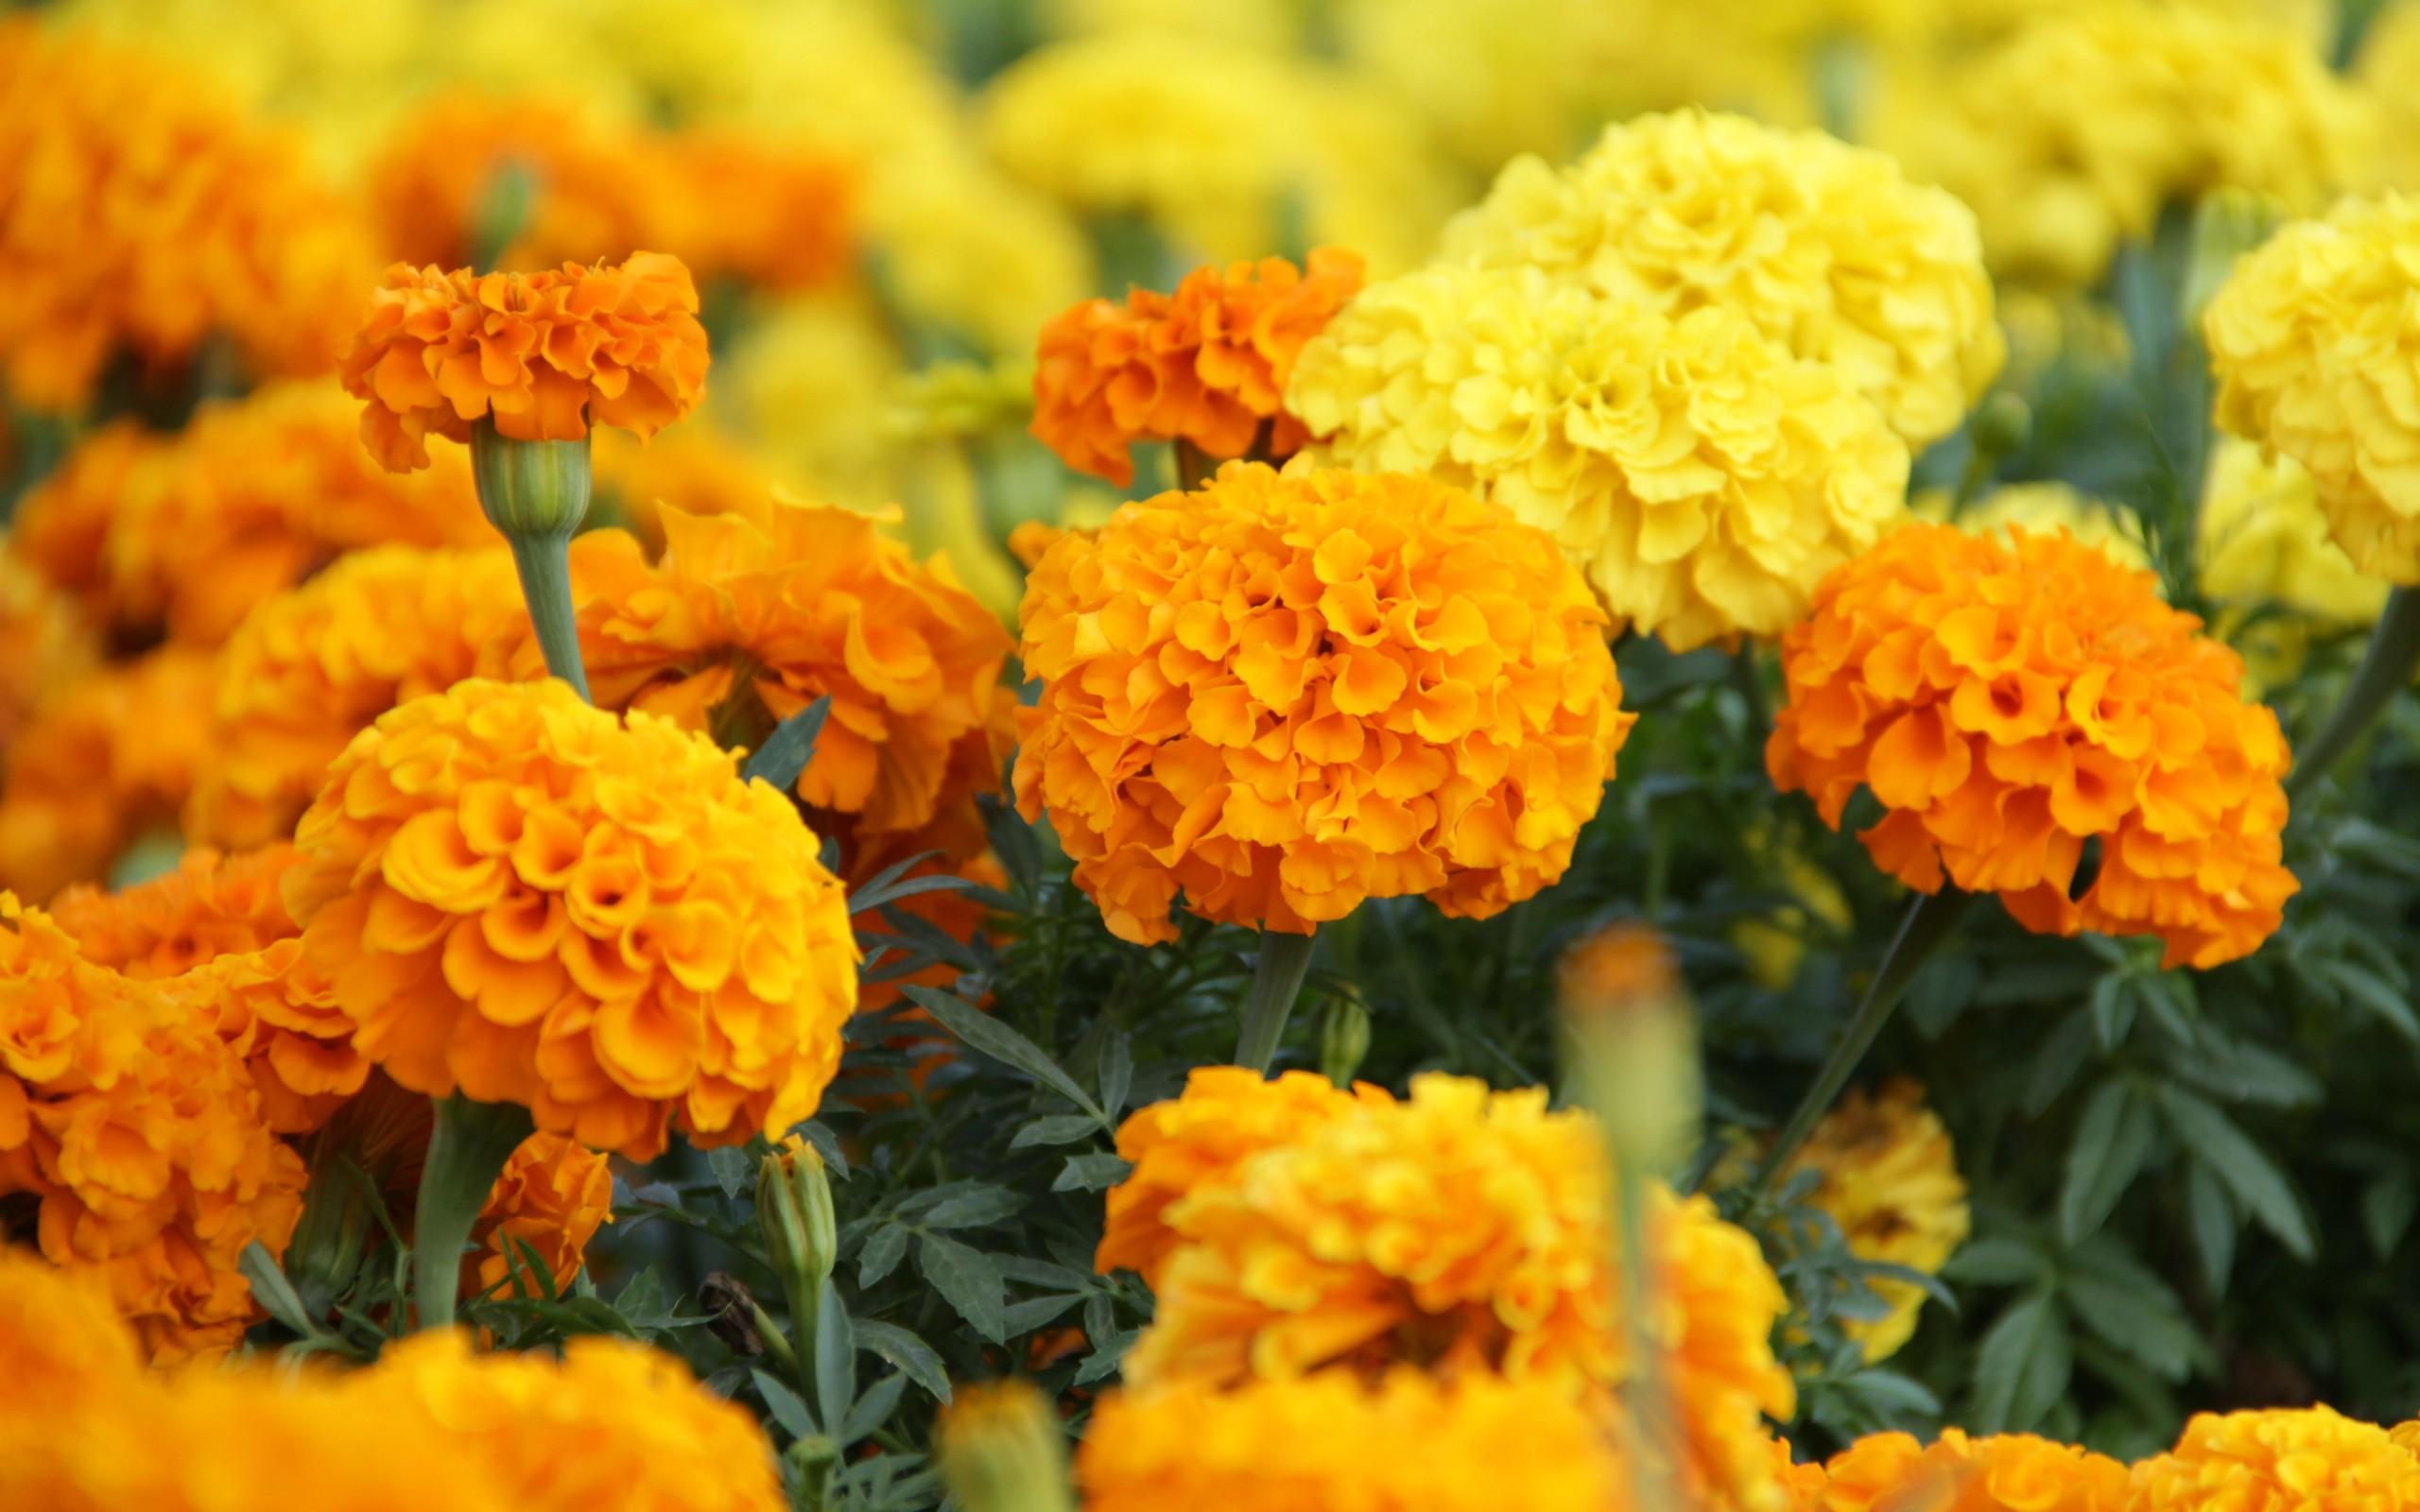 Keep mosquitoes away with marigolds!